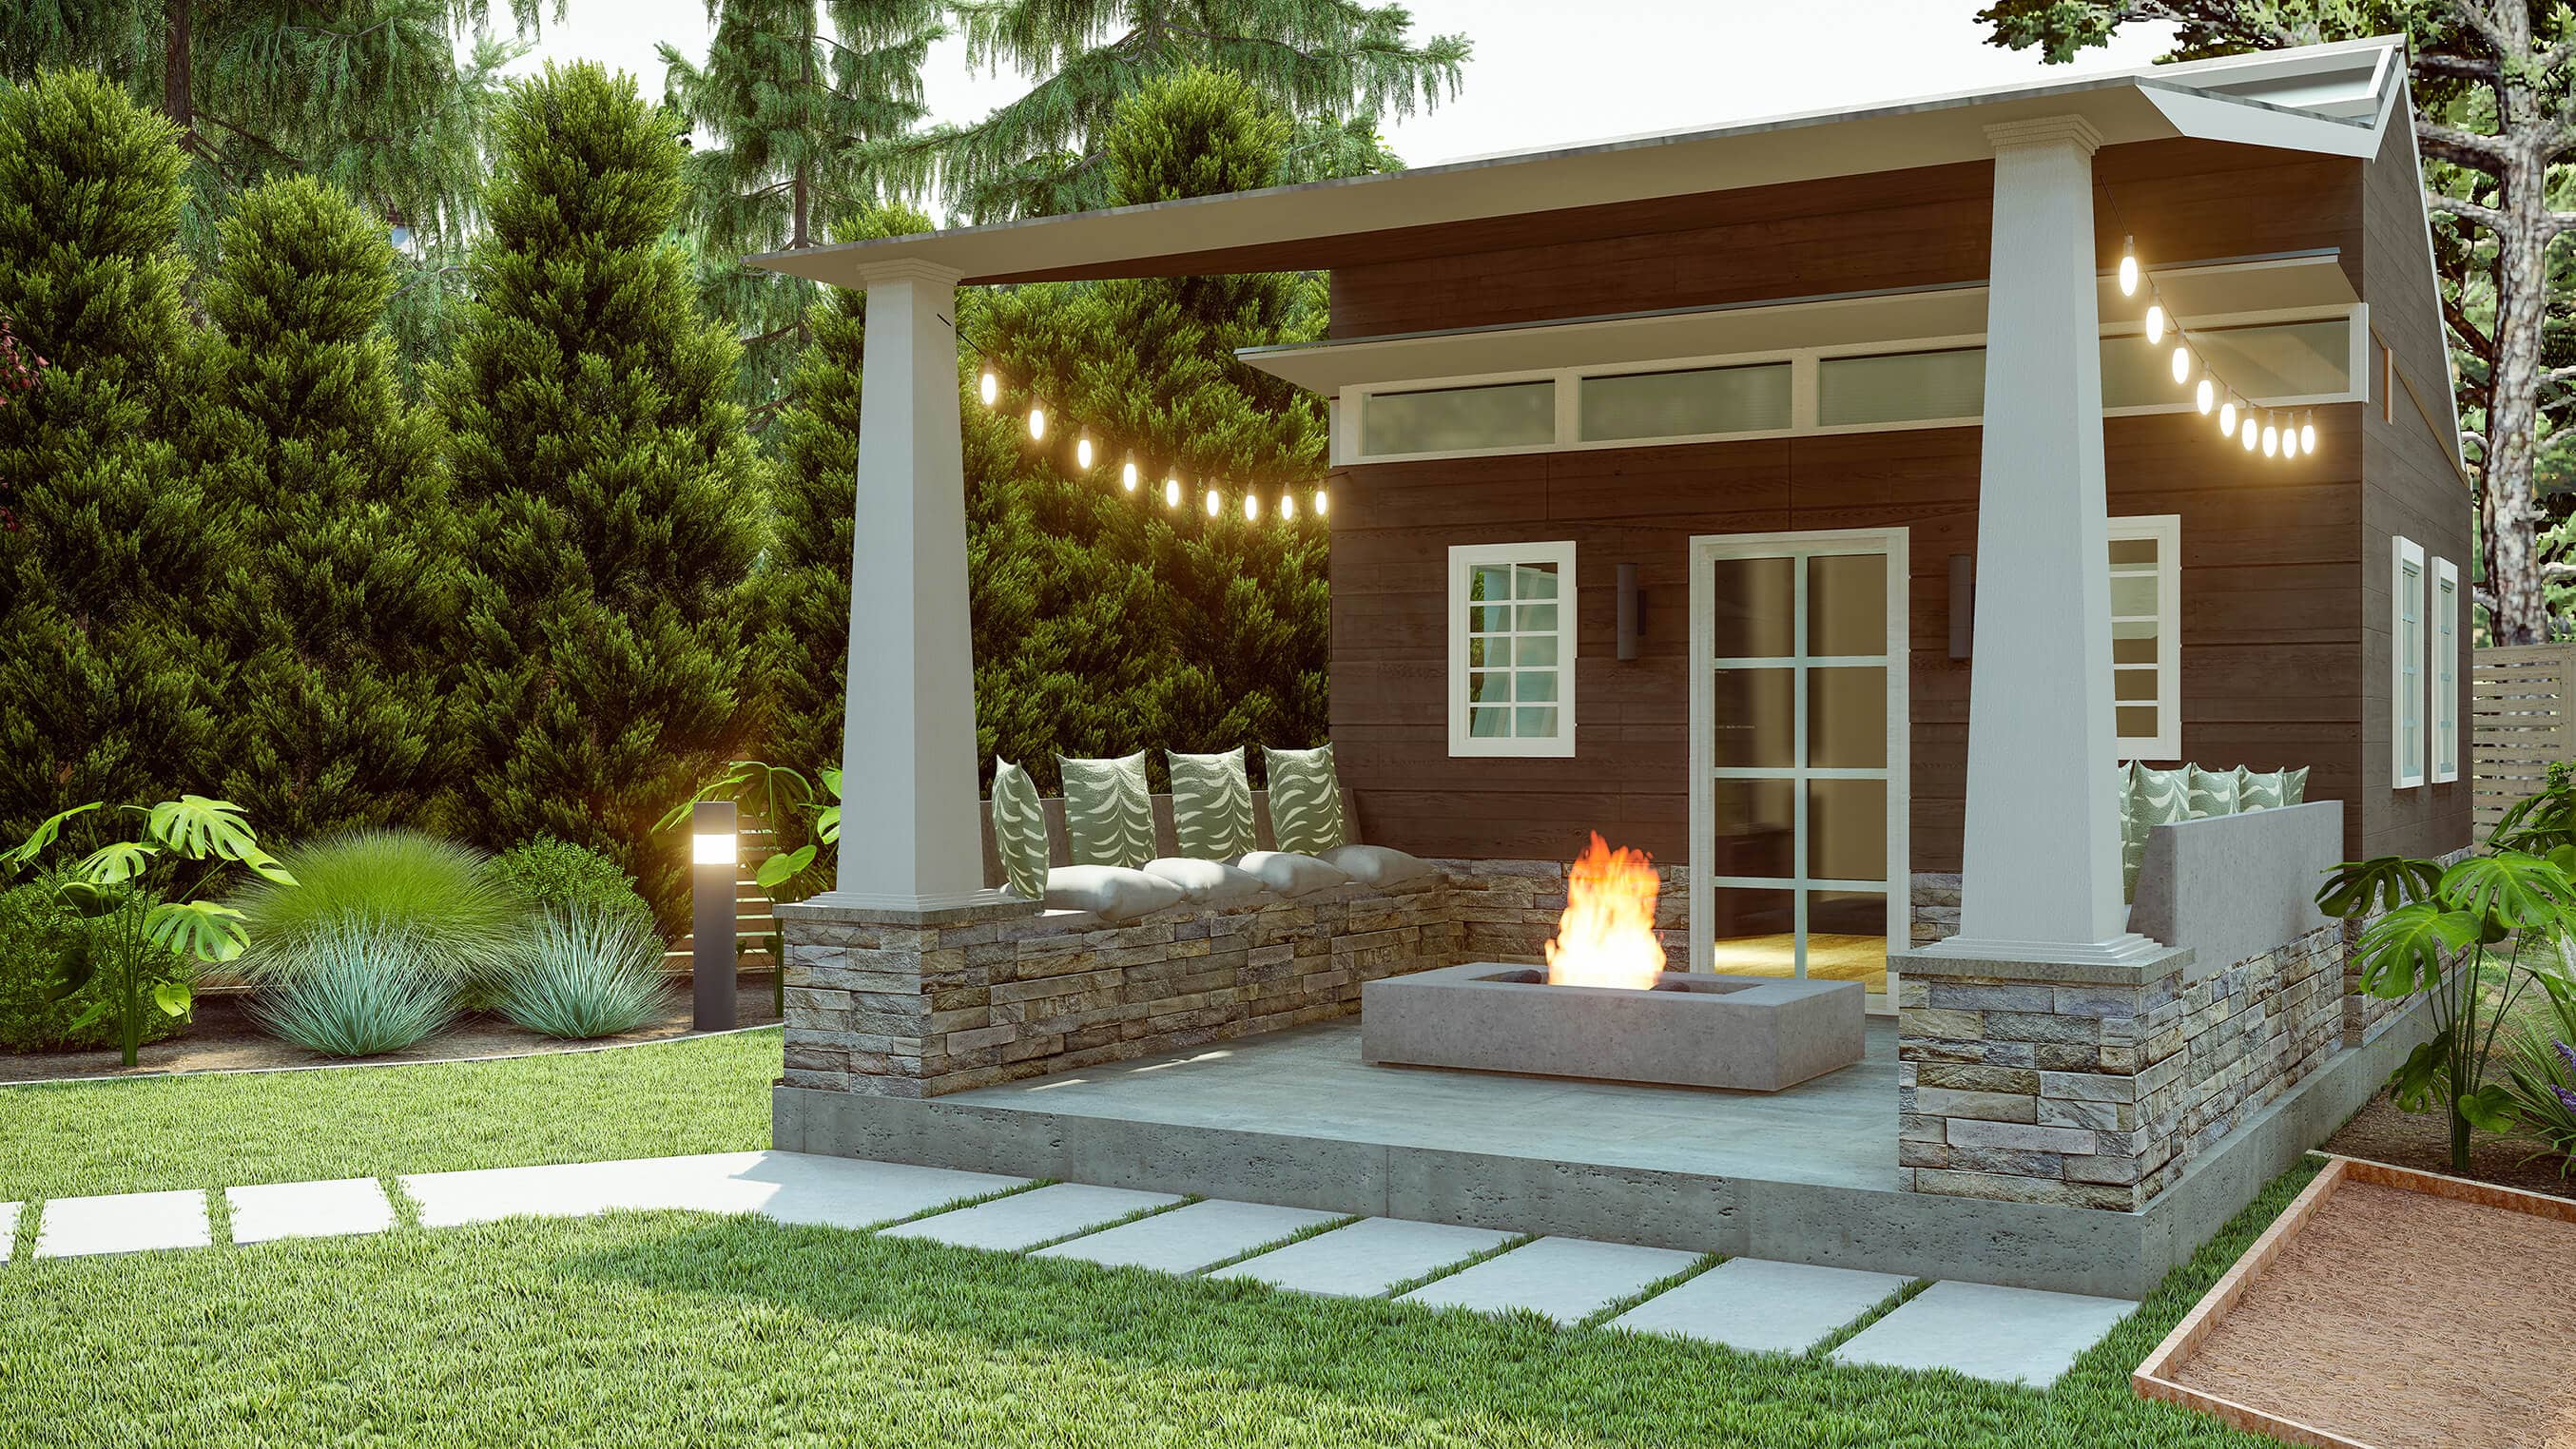 Homelydesign-patio-firepit-evening-glow